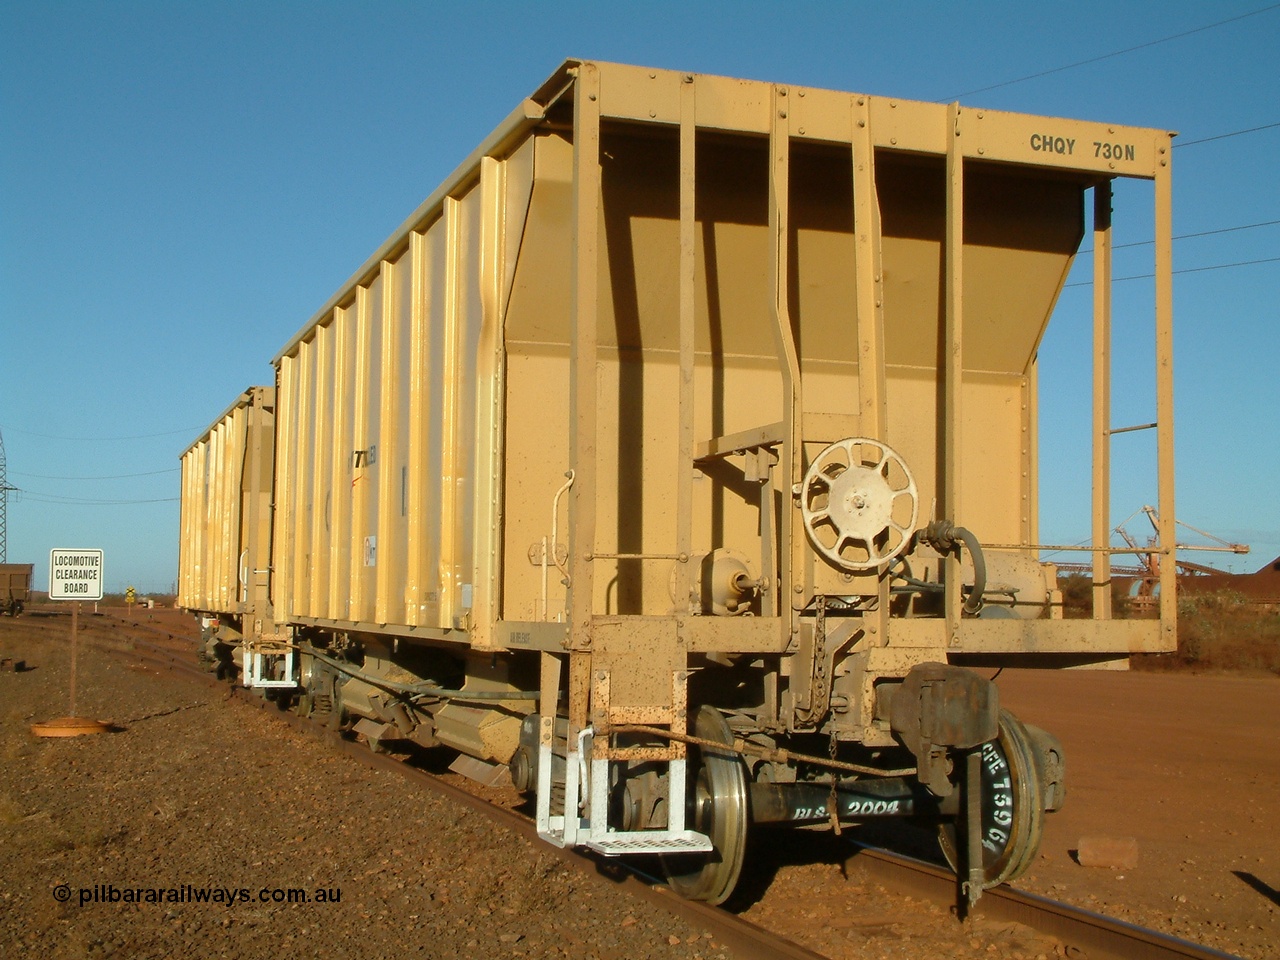 040815 164800
Nelson Point, CFCLA ballast waggon CHQY type 730 having just been offloaded from road transport and placed on rail, view from handbrake end.
Keywords: CHQY-type;CHQY730;CFCLA;CRDX-type;BHP-ballast-waggon;